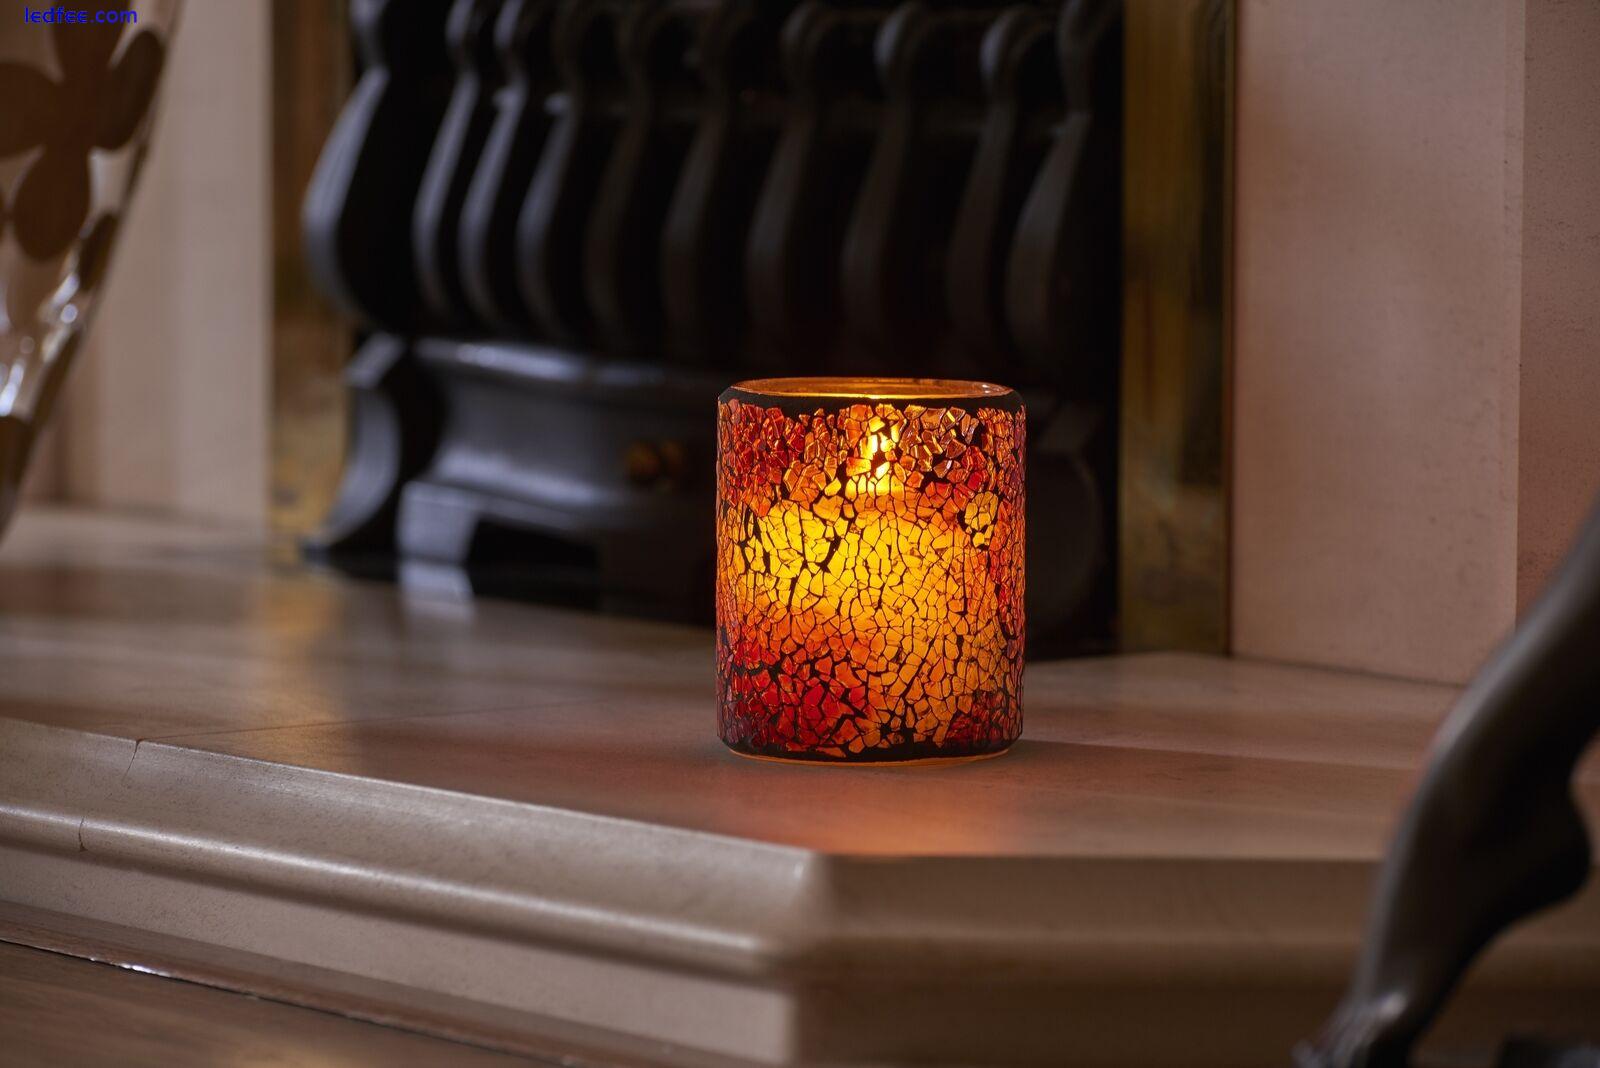 Auraglow Mosaic Glass Flickering Flameless LED Decorative Candle Safety Flame 1 